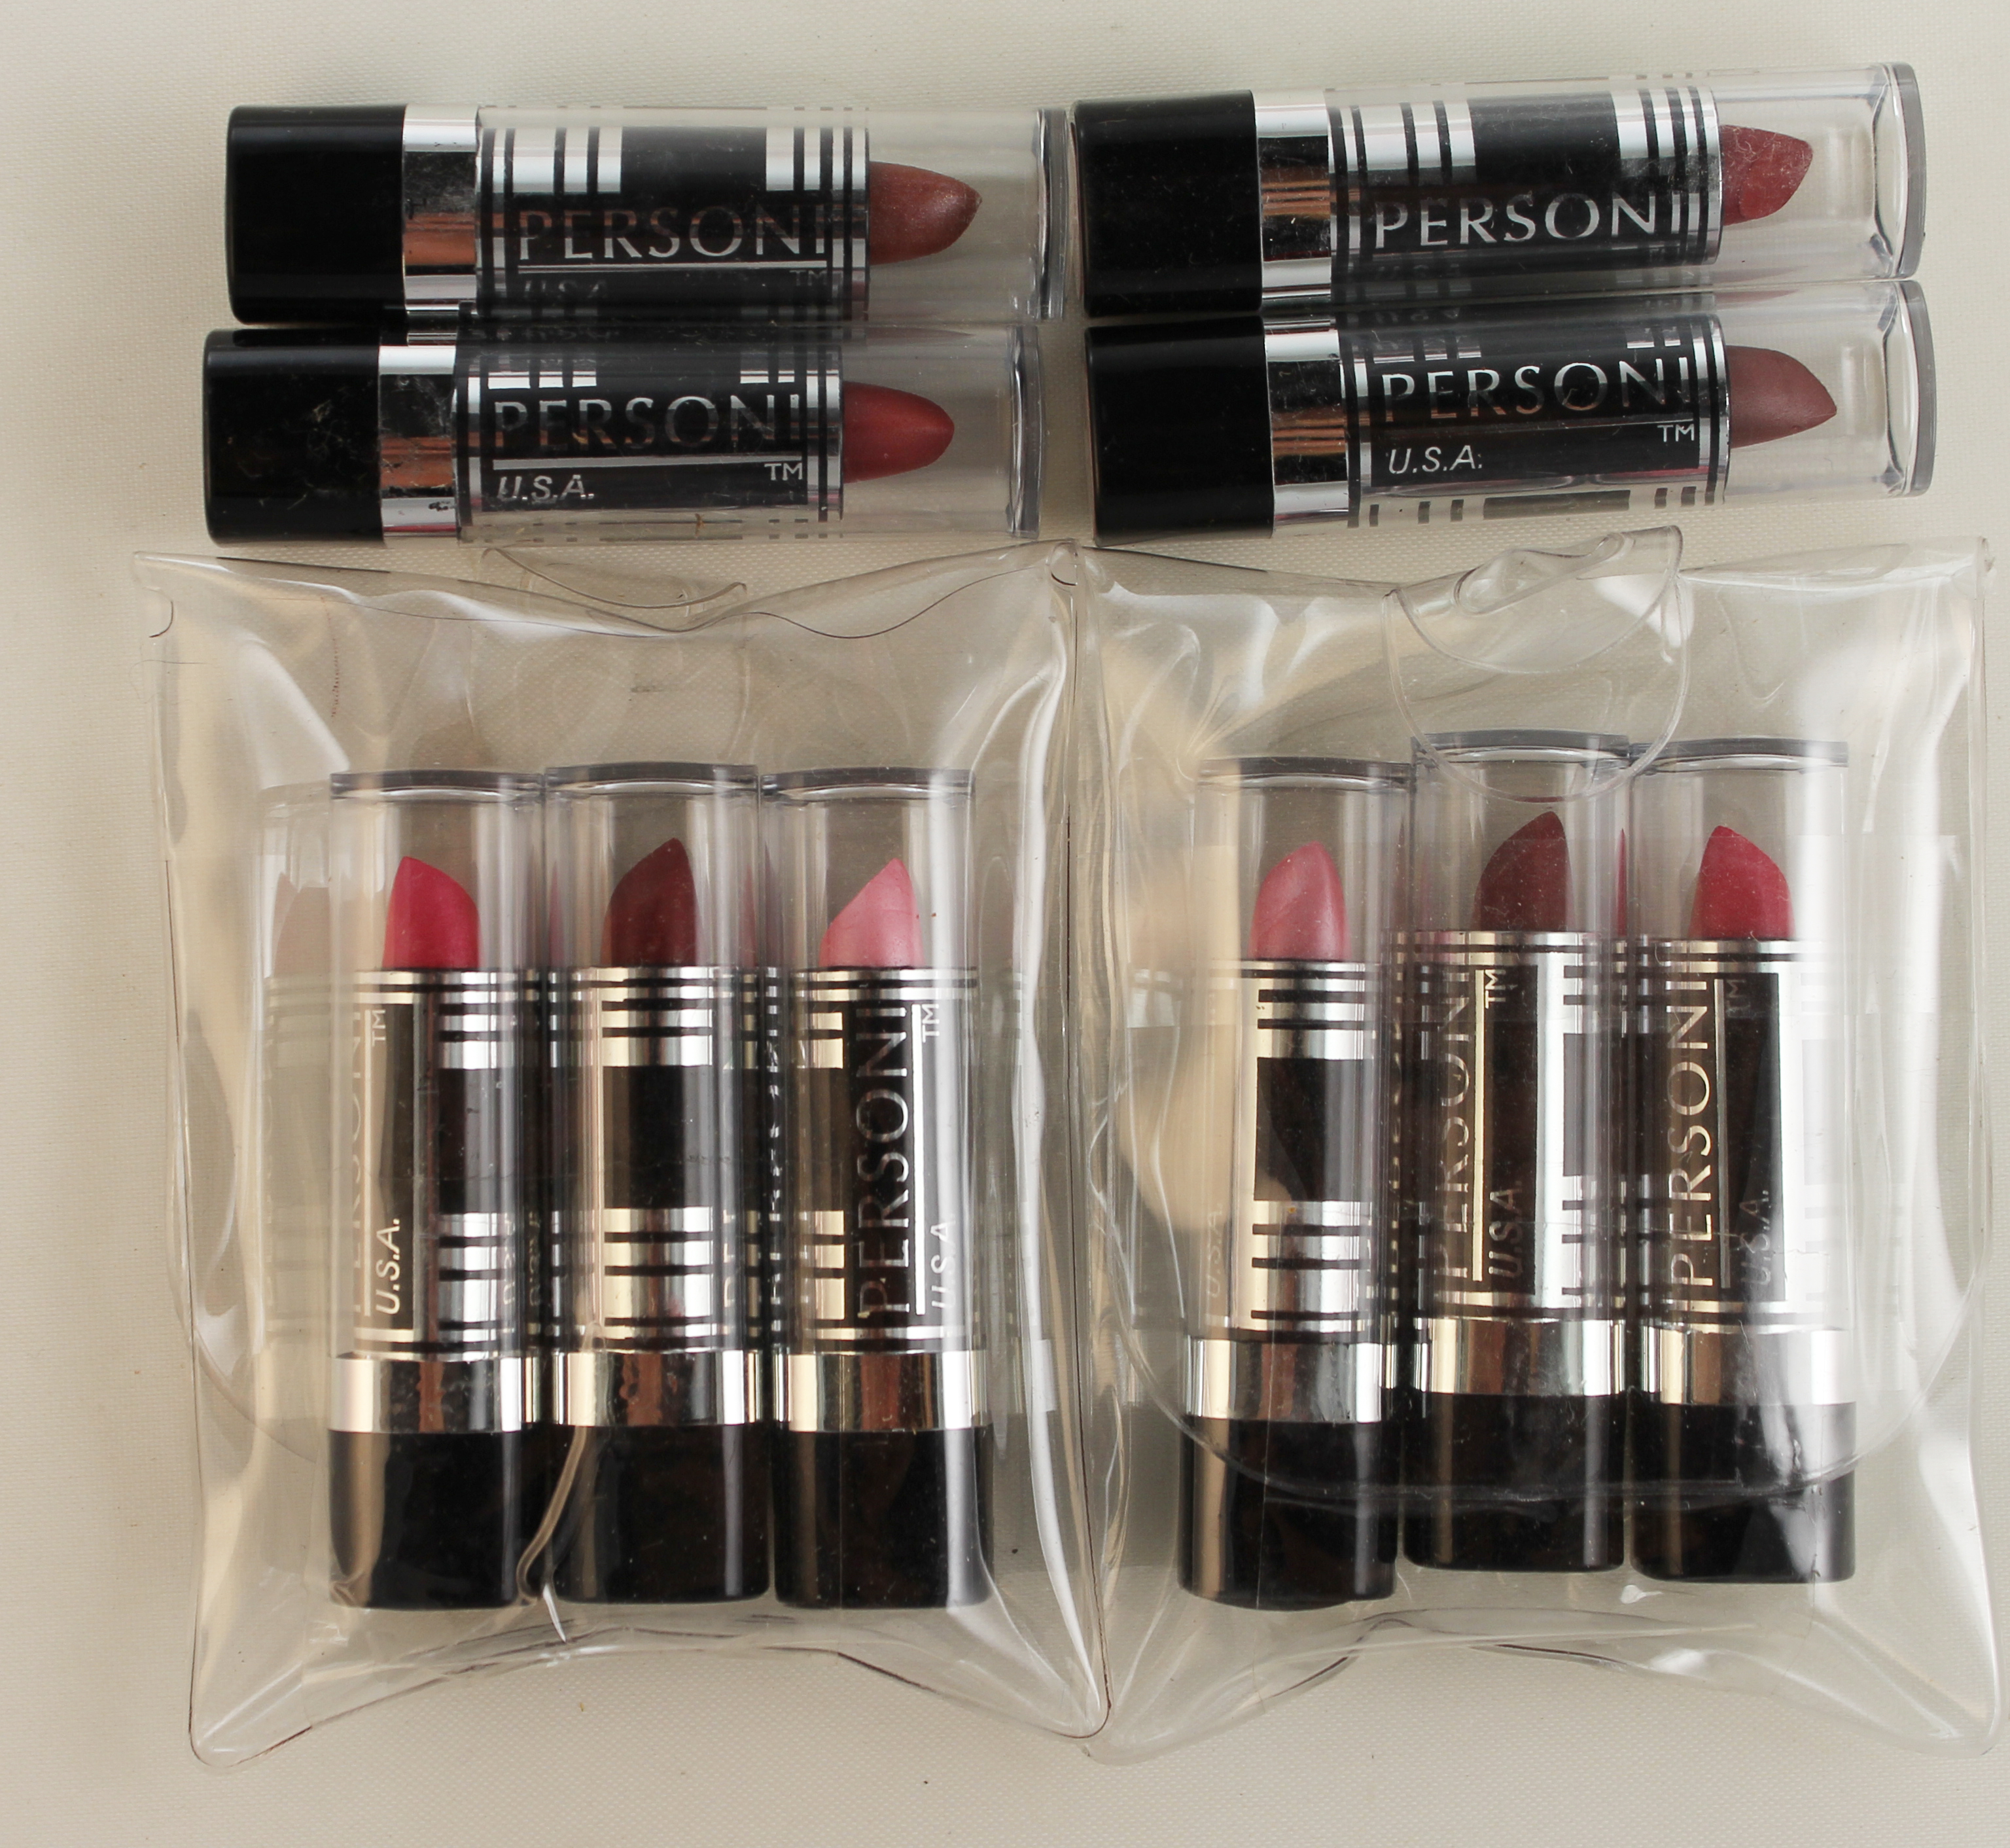 Personi Lip Stick lipsticks in assorted colors (Sold in lots of 12) - Click Image to Close